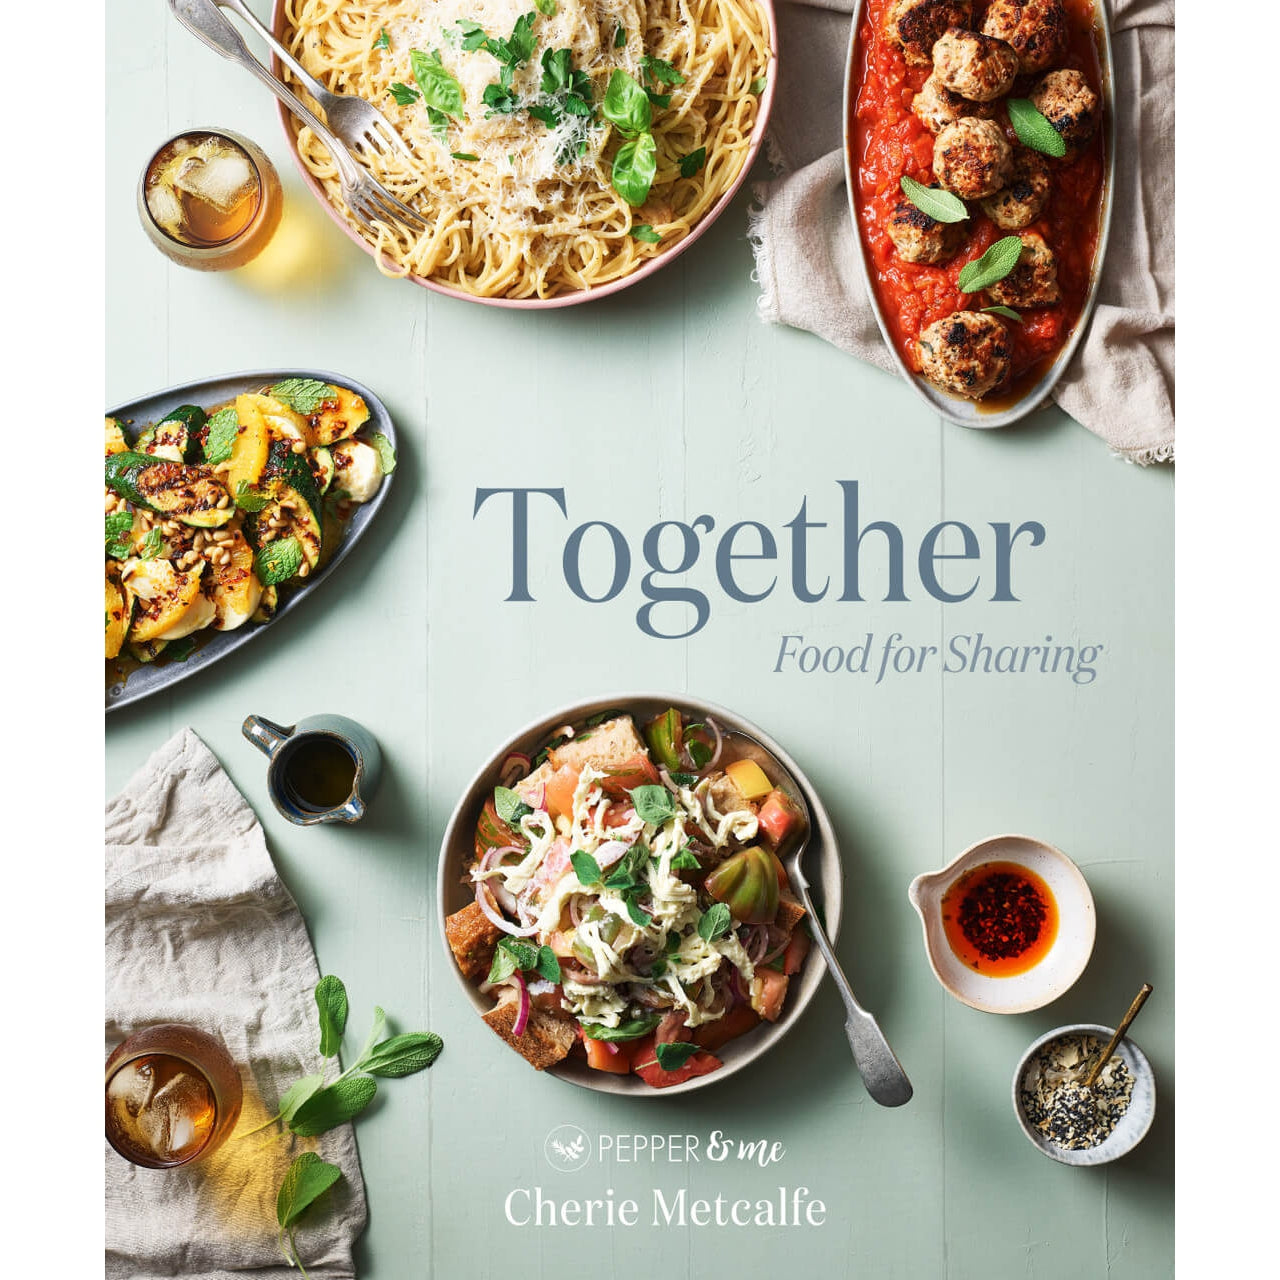 Together Food for Sharing - Cherie Metcalfe